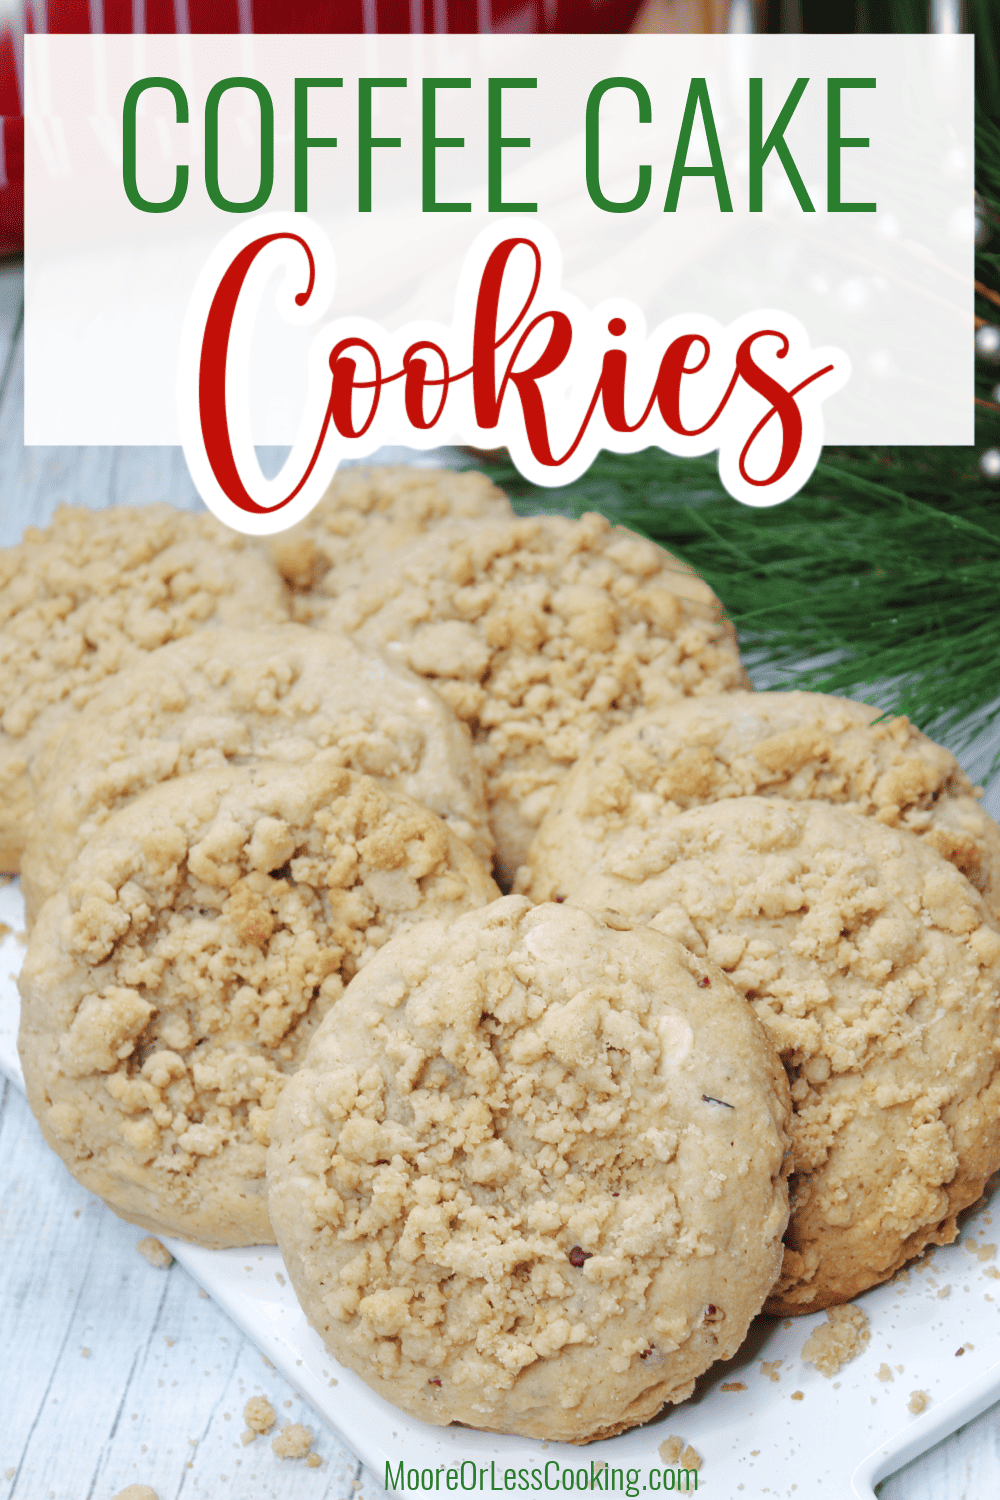 Topped with a cinnamon streusel crumble, these Coffee Cake Cookies are a scrumptious treat that's perfect for breakfast, dessert, or snack time. Quick and easy to make, these cookies are packed with buttery flavor, brown sugar, and cinnamon, making them completely irresistible! via @Mooreorlesscook